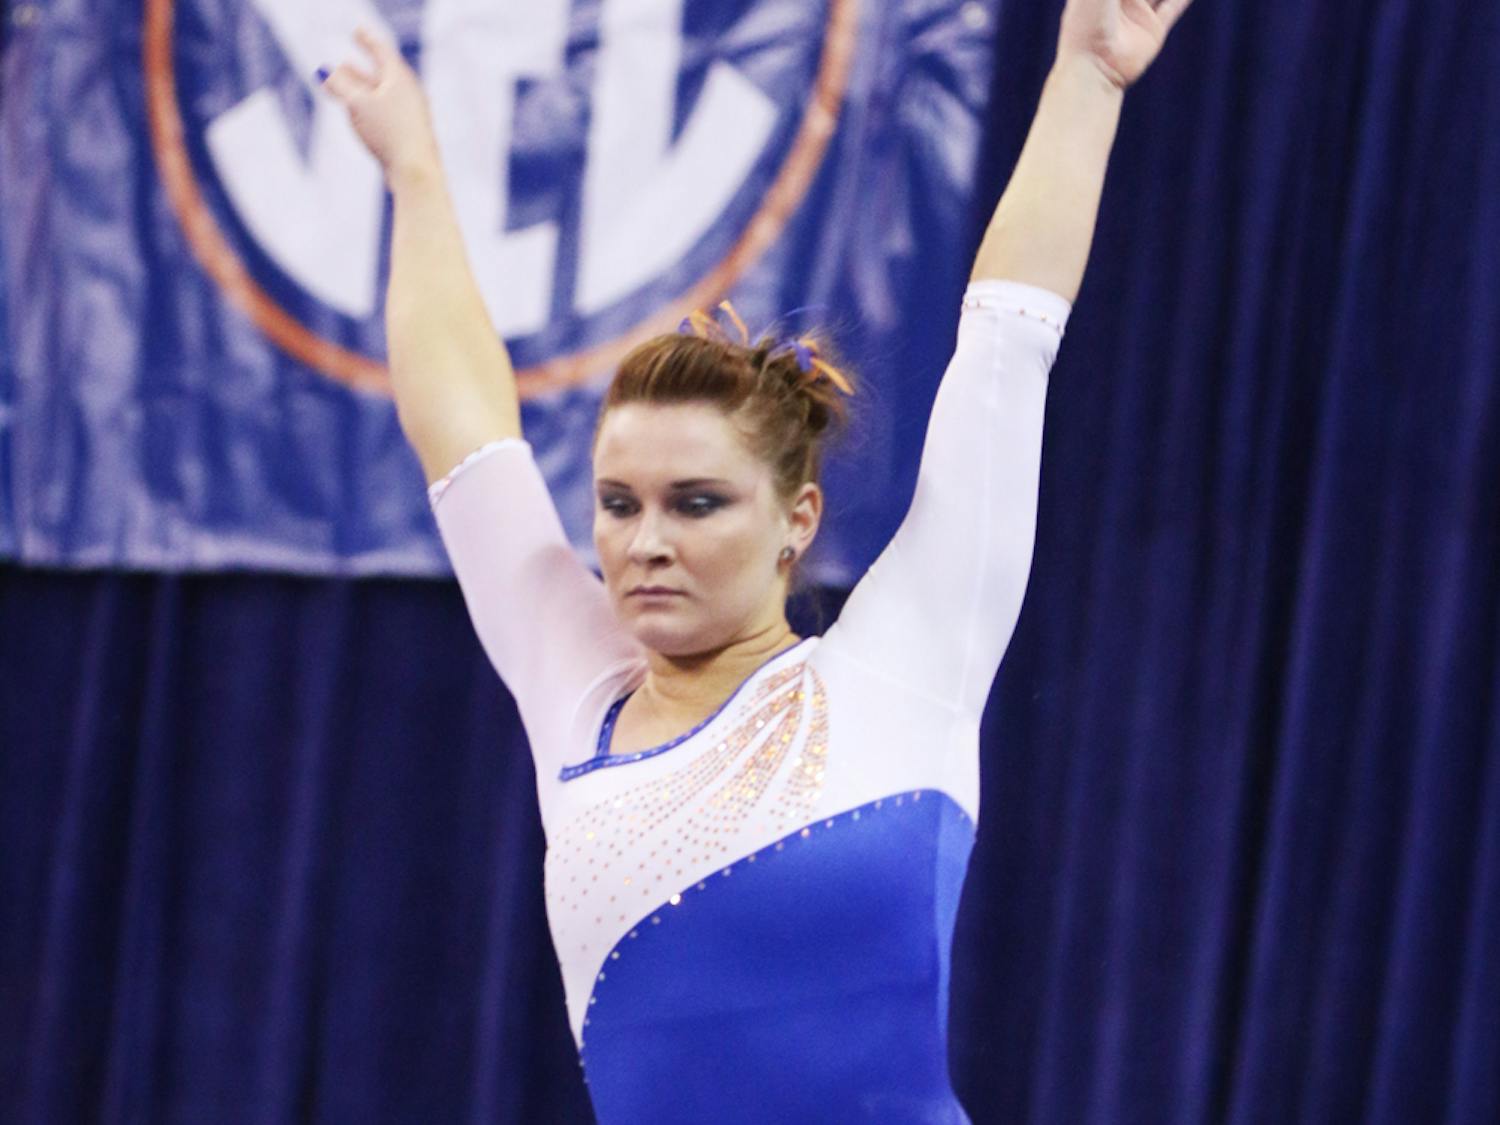 Bridget Sloan performs a beam routine during Florida’s 197.525-196.025 win against Arkansas on Feb. 14 in the O’Connell Center.